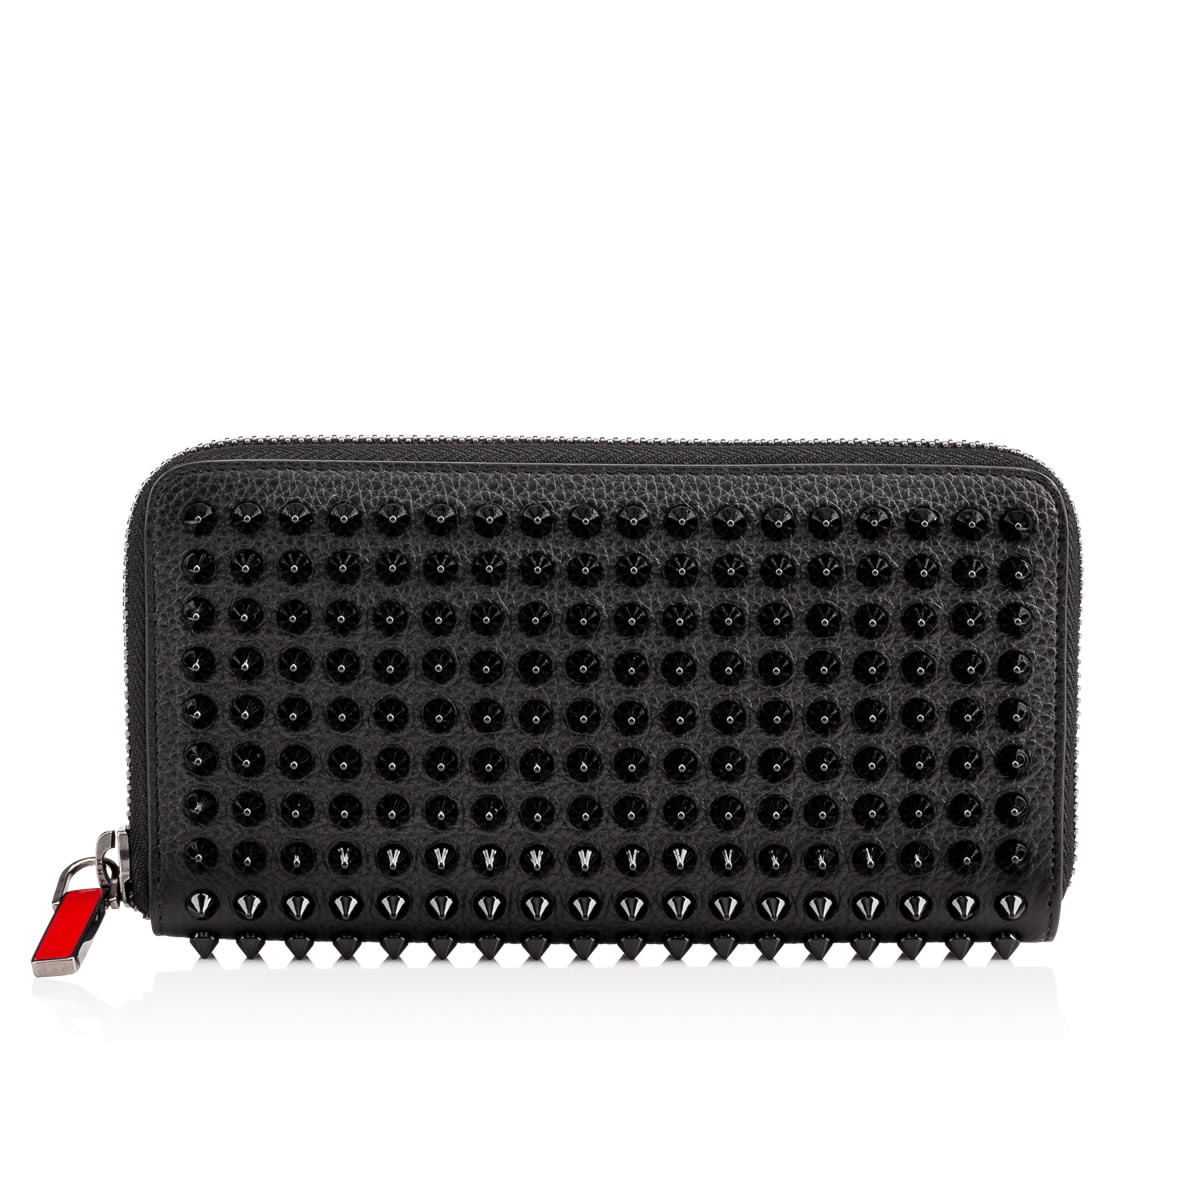 CHRISTIAN LOUBOUTIN Panettone Spike-Embellished Leather Wallet in Black ...